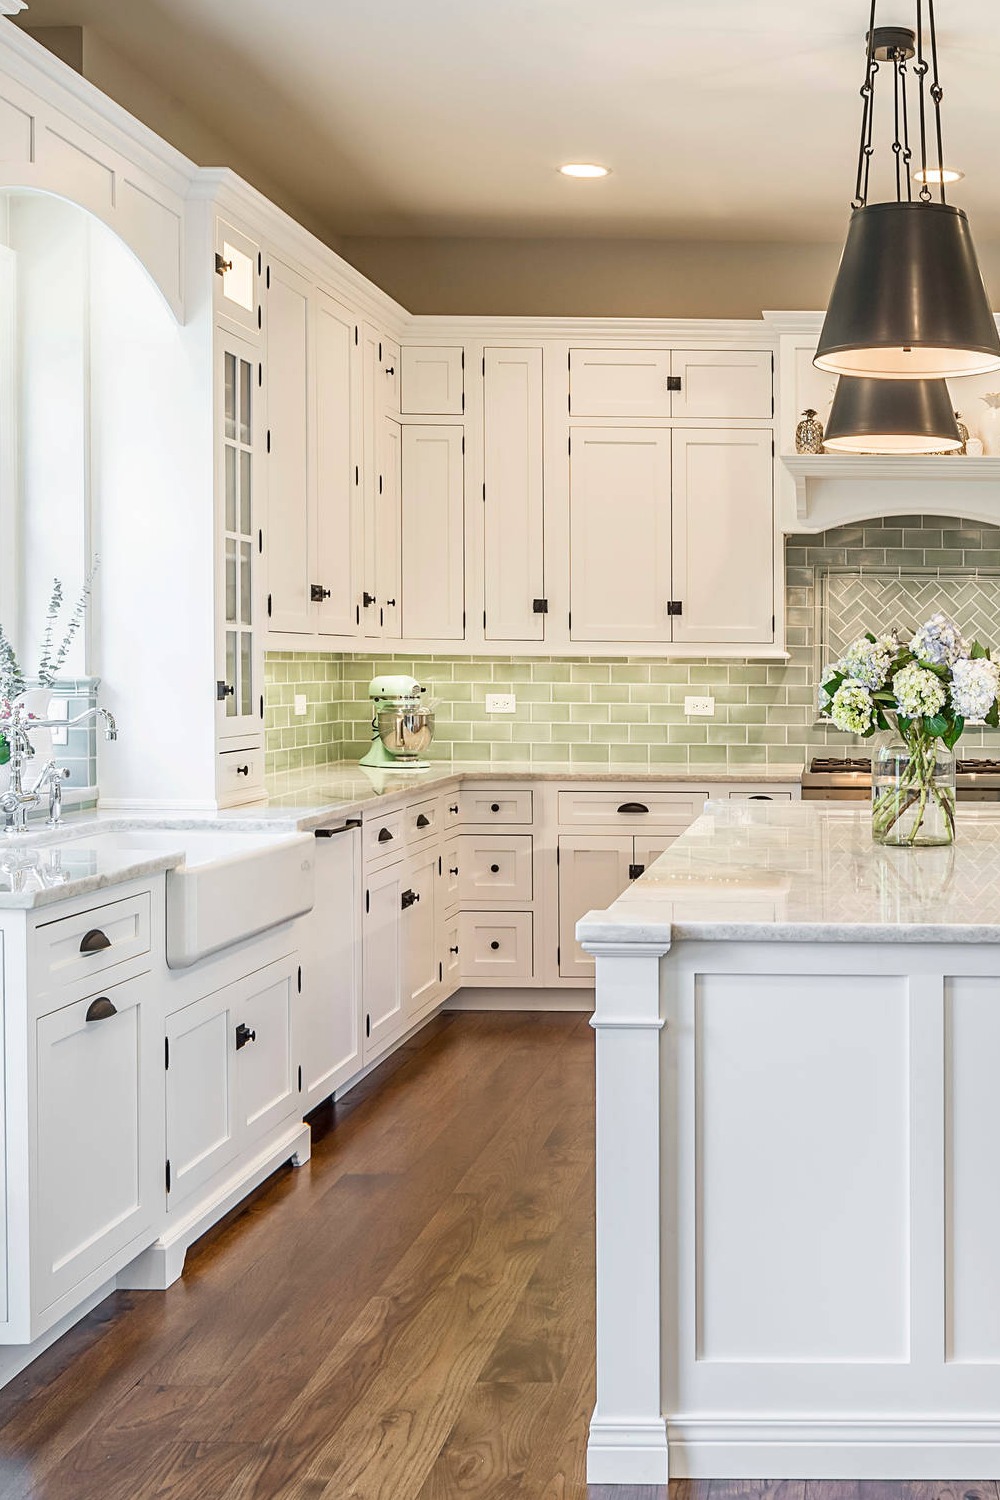 White Cabinets Green Tile Backsplash With White Cabinets Subway Tiles White Grout